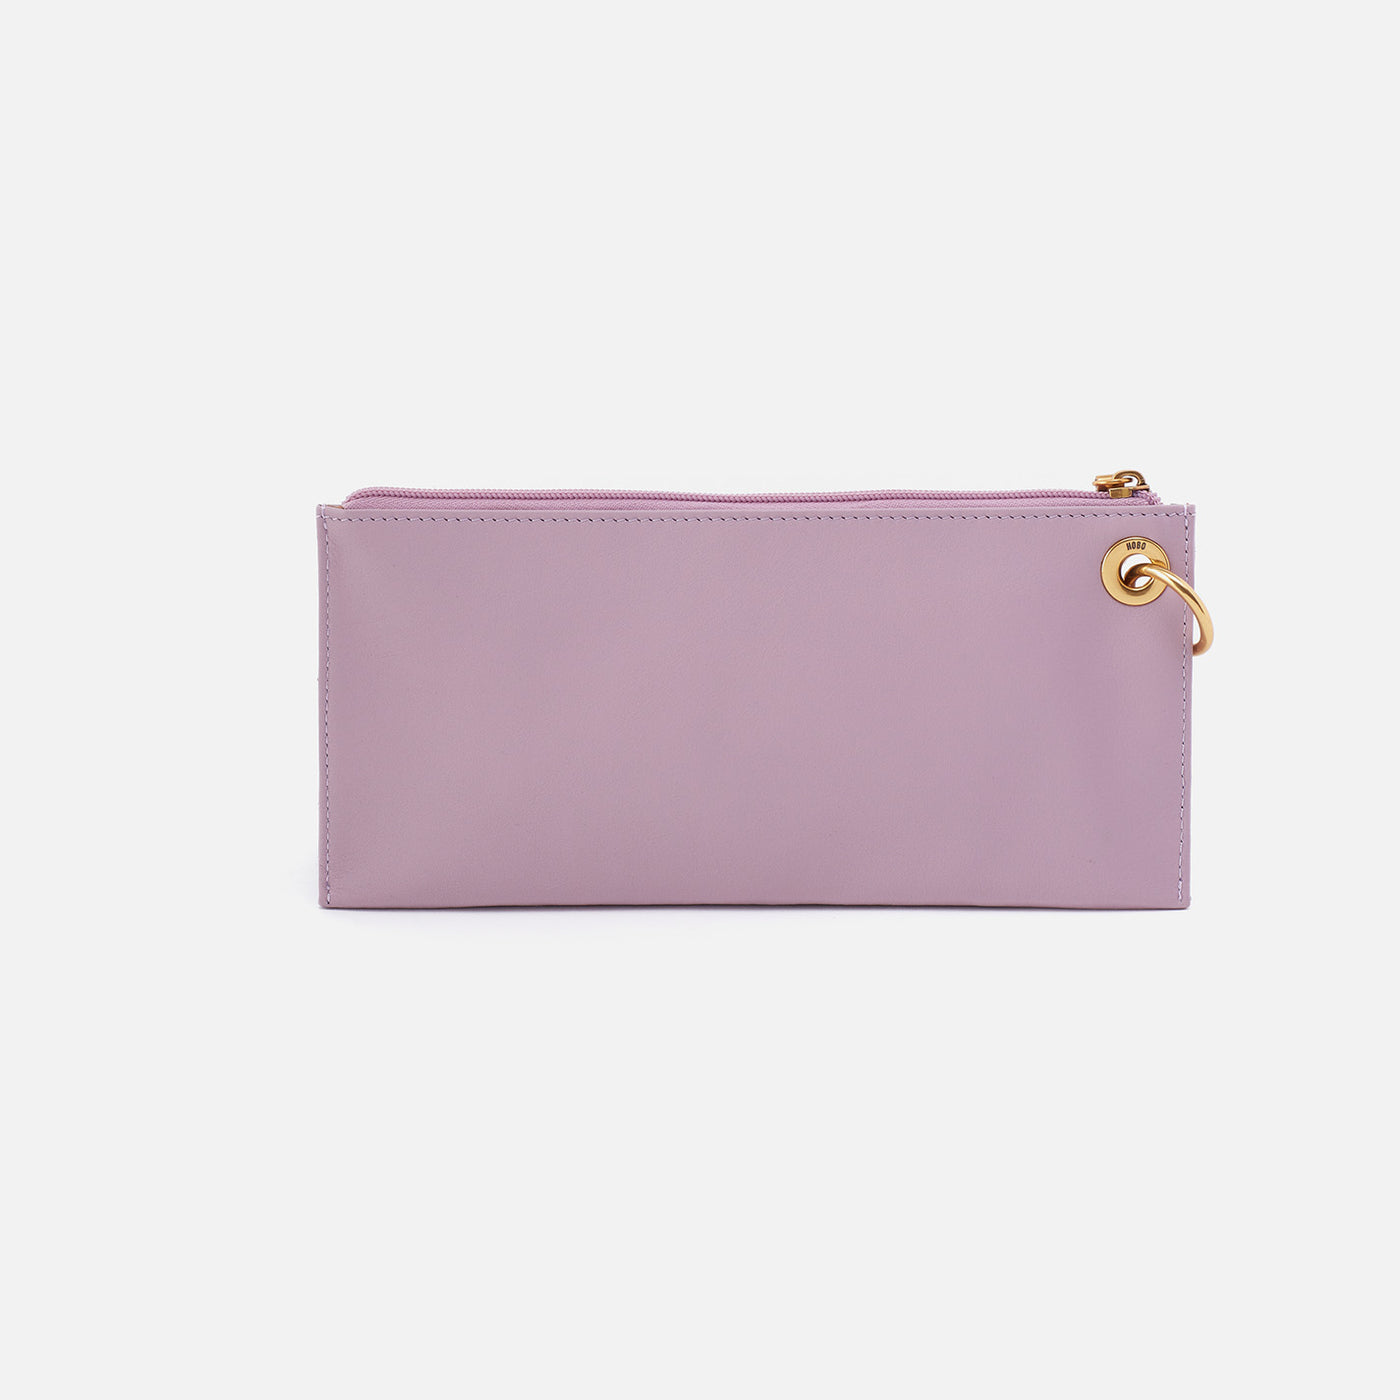 Vida Wristlet in Quilted Silk Napa Leather - Lavender